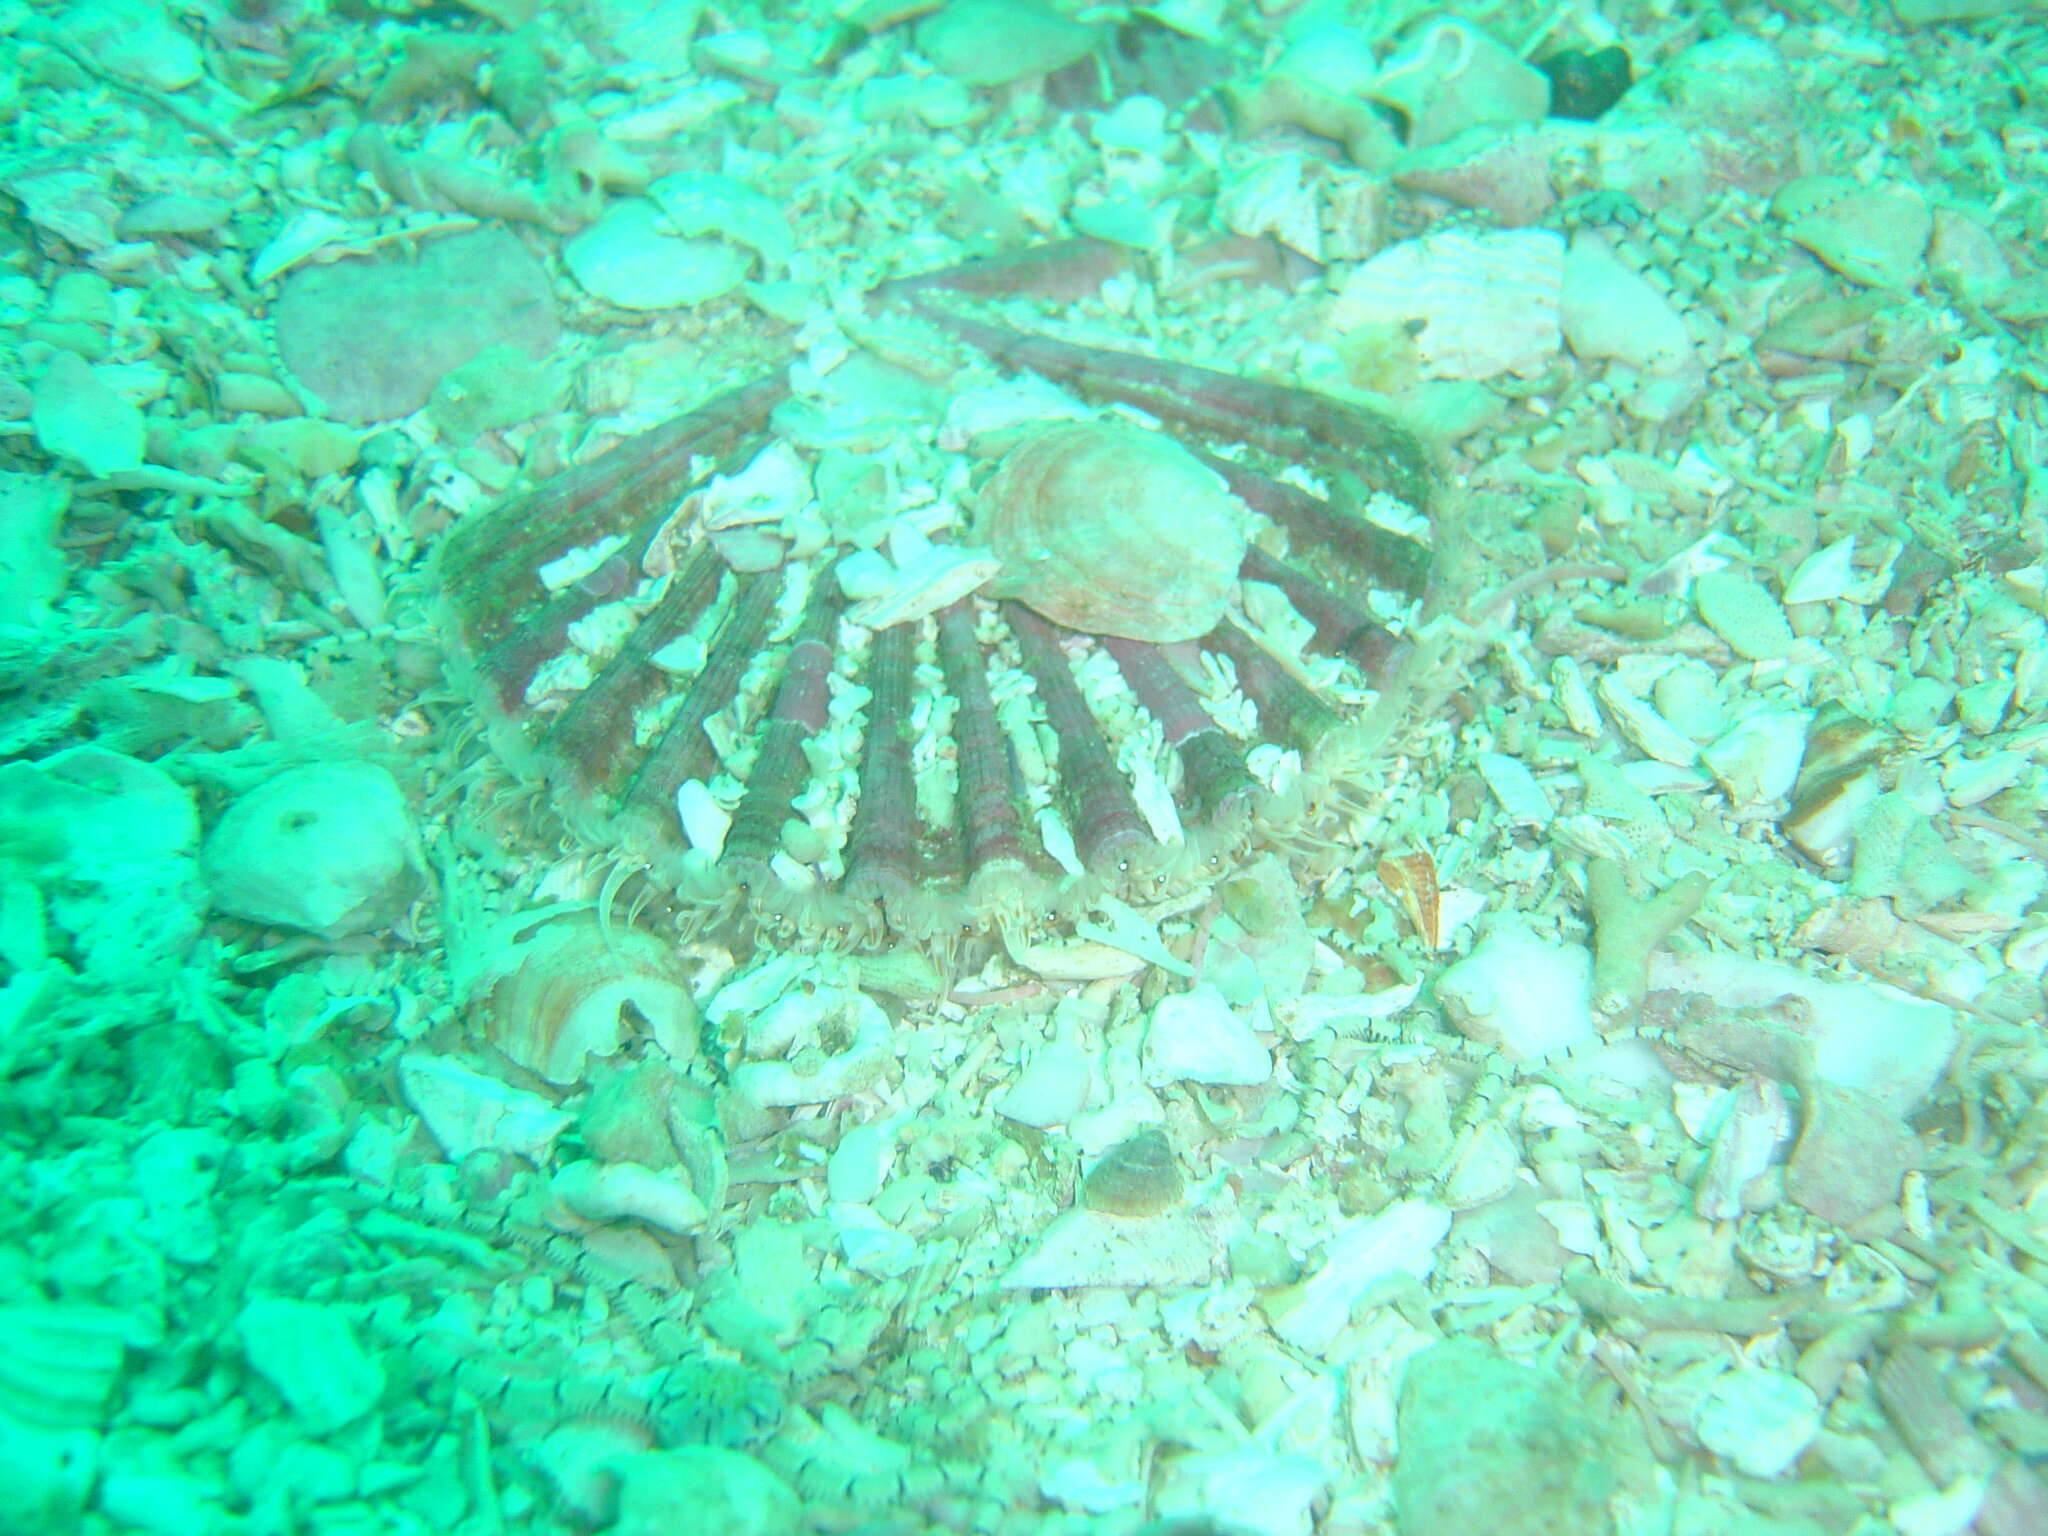 Image of South African scallop